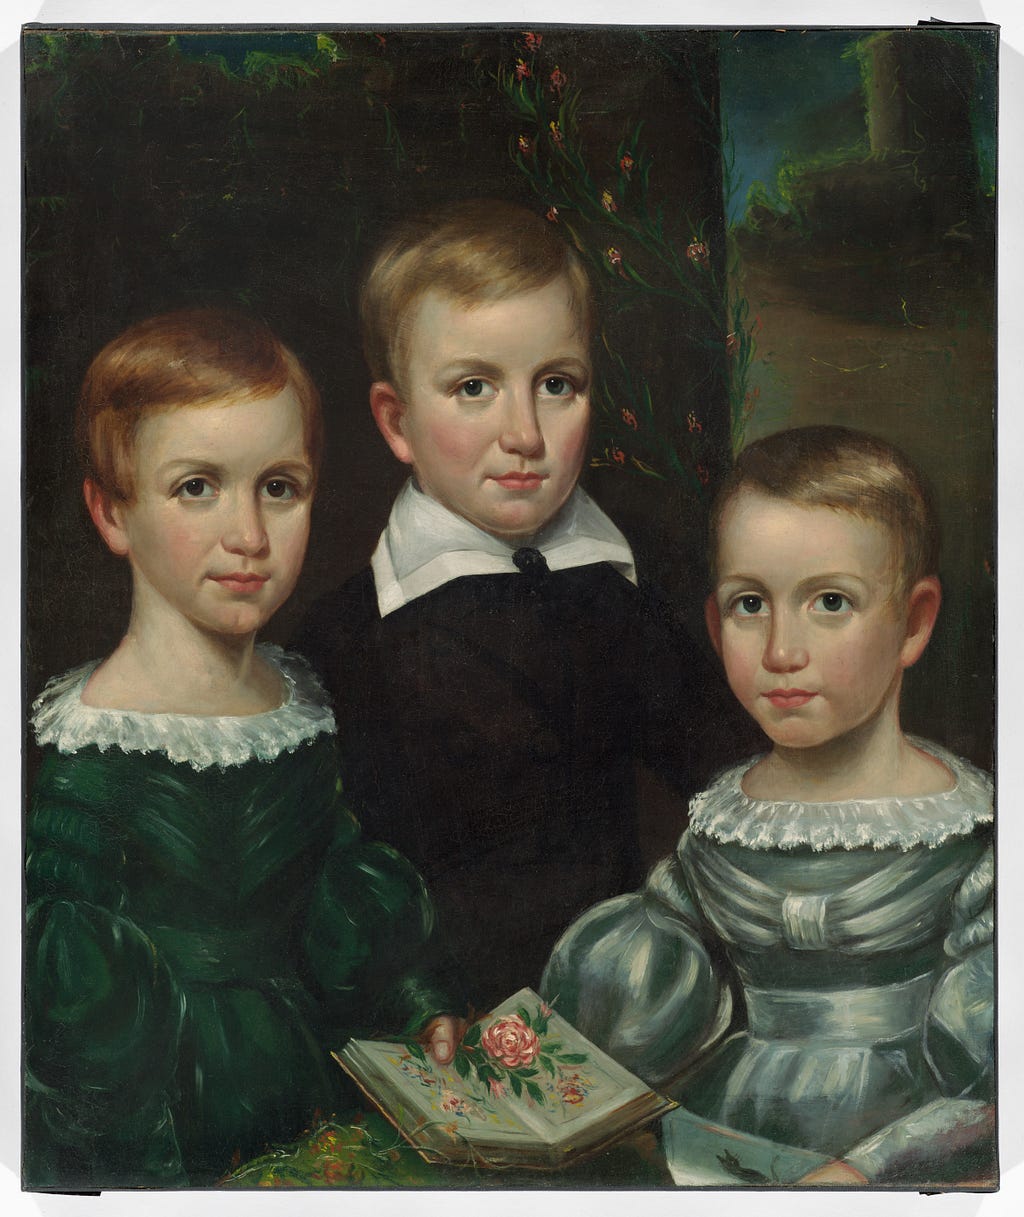 Emily Elizabeth, Austin, and Lavinia Dickinson by Otis Allen Bullard, oil on canvas, ca. 1840, Houghton Library, Harvard University — image courtesy of Wikipedia and is labeled Public Domain